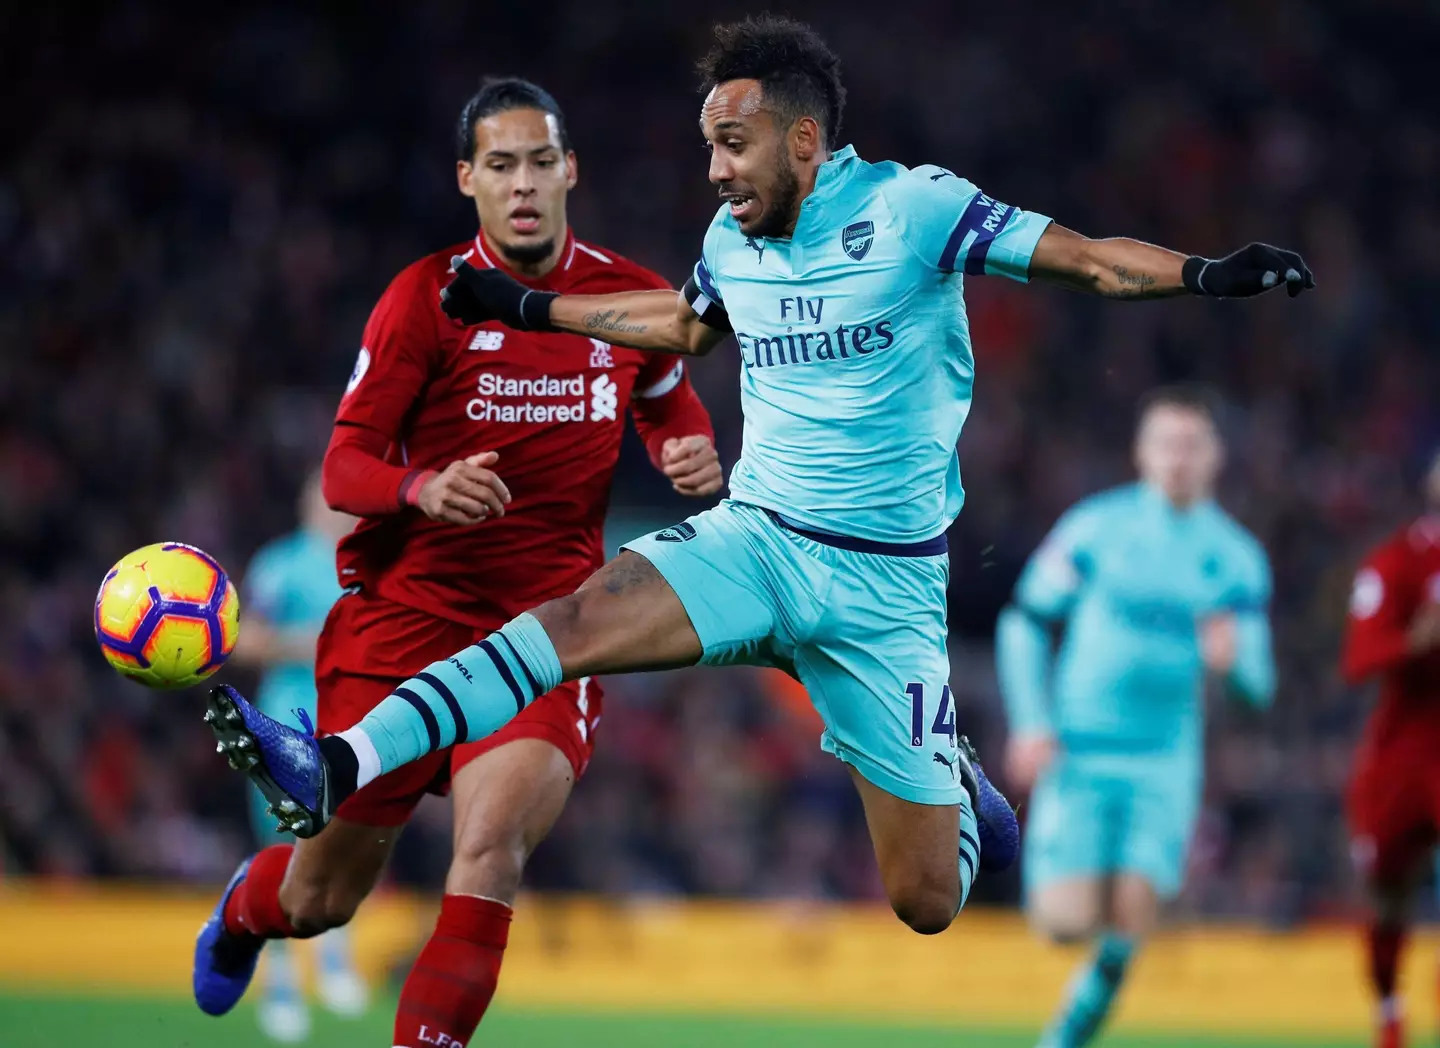 Most people would expect Aubameyang to pick Van Dijk. Image: PA Images